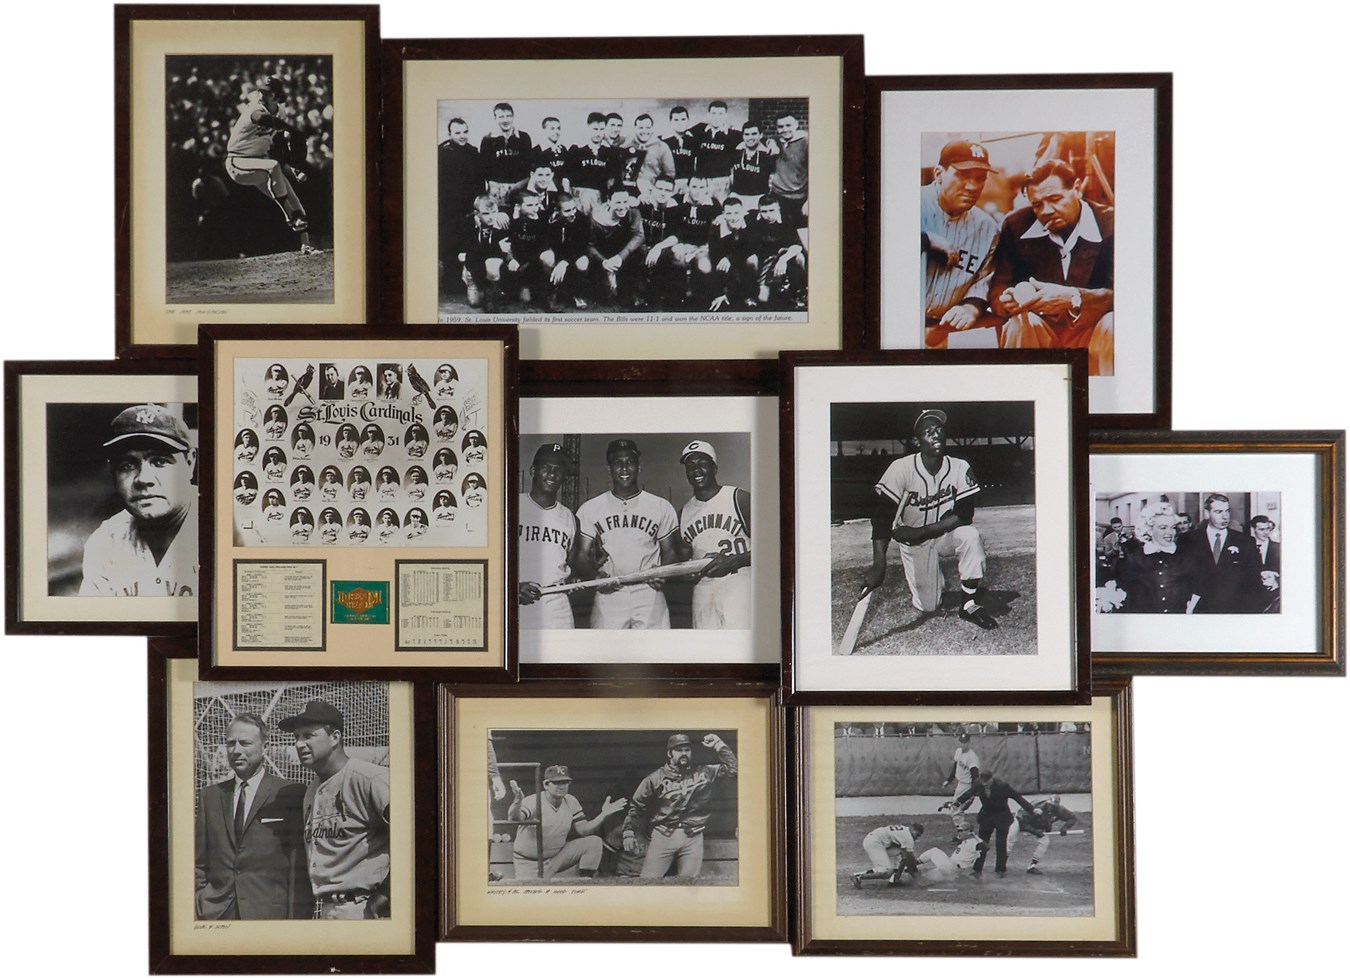 The Mike Shannon St. Louis Cardinals Collection - Framed Items that Hung in Mike Shannon's Restaurant (34)